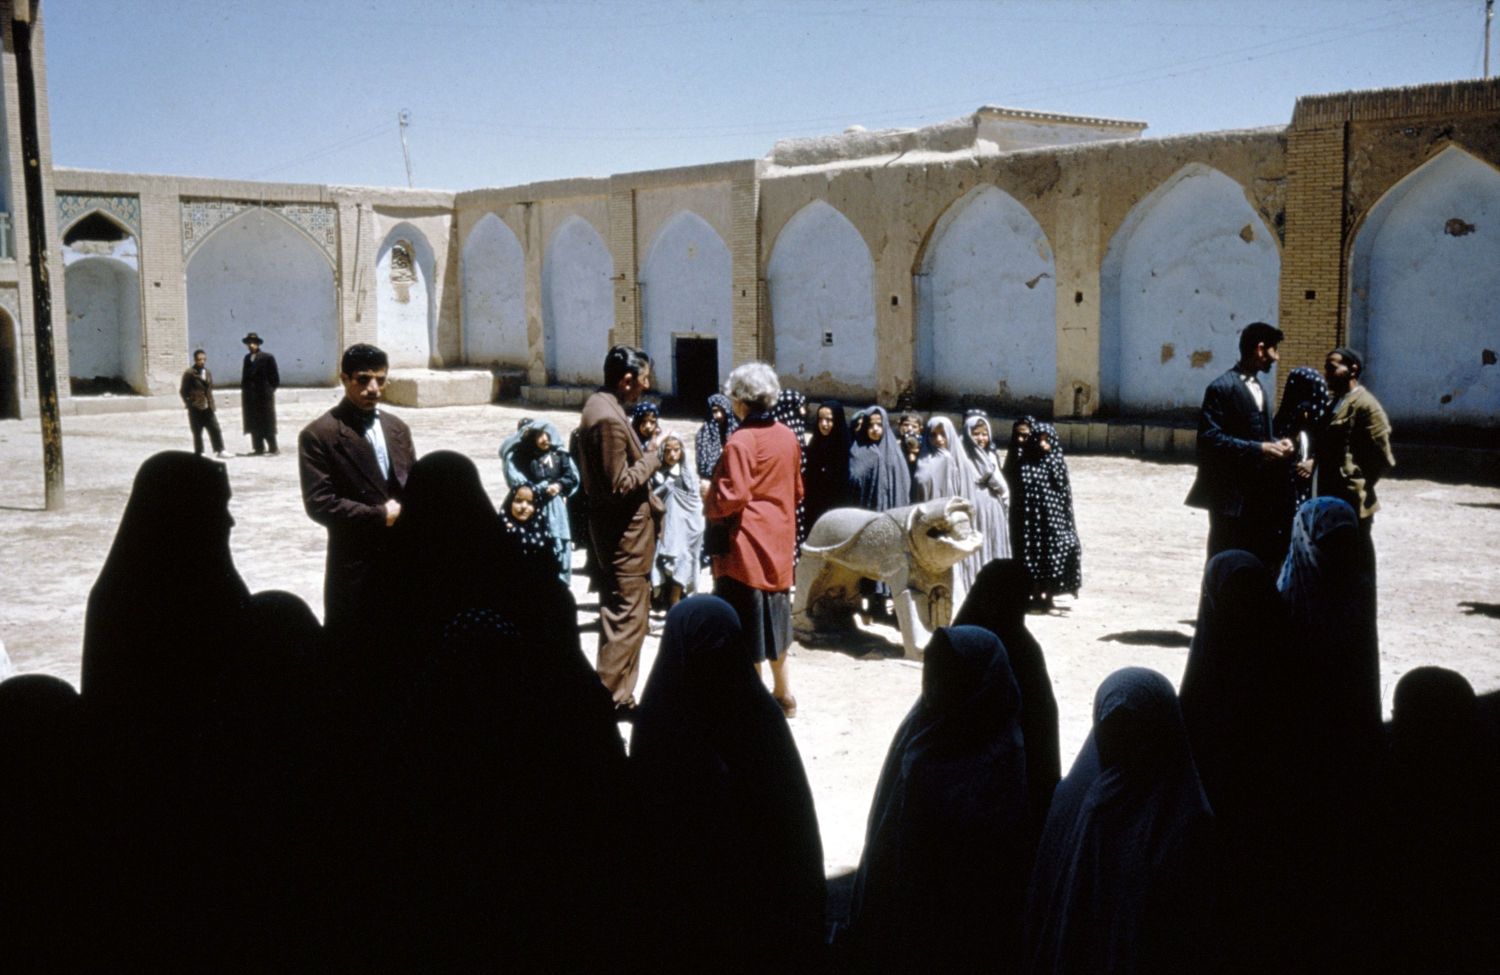 Darb-i Imam - View of visitors in forecourt.